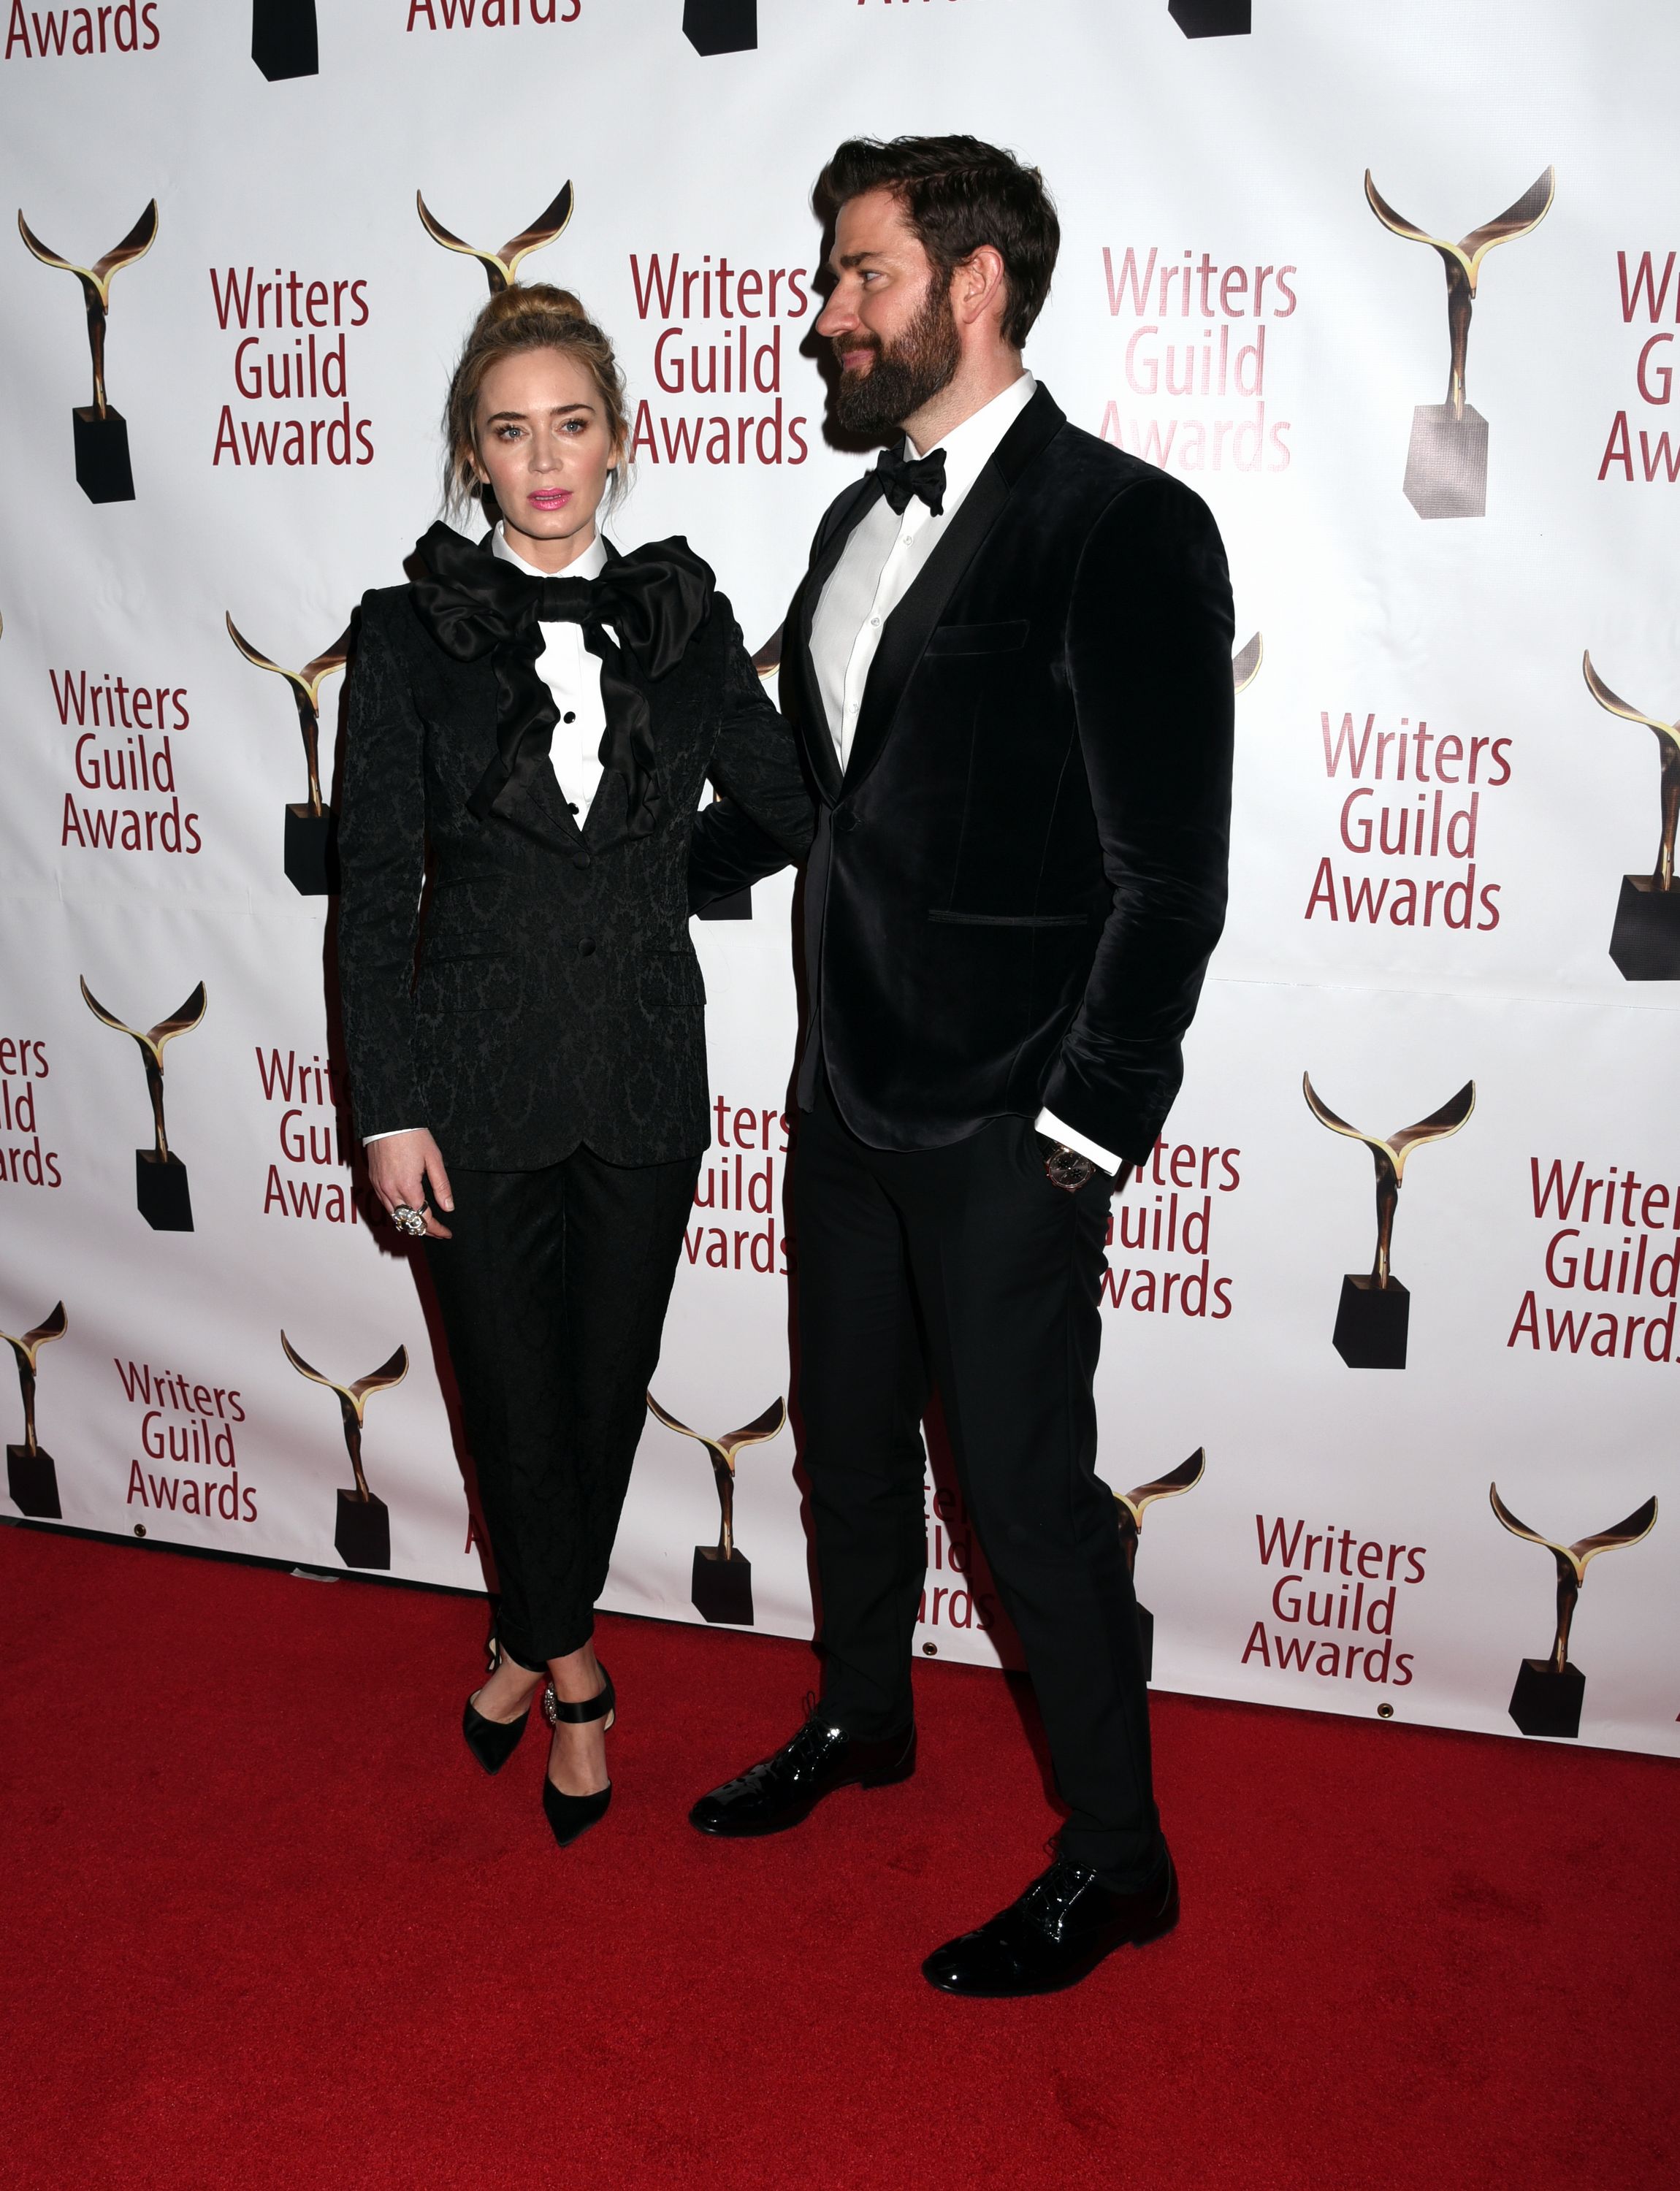 2019-02-17-71st-Annual-Writers-Guild-Awards-143.jpg